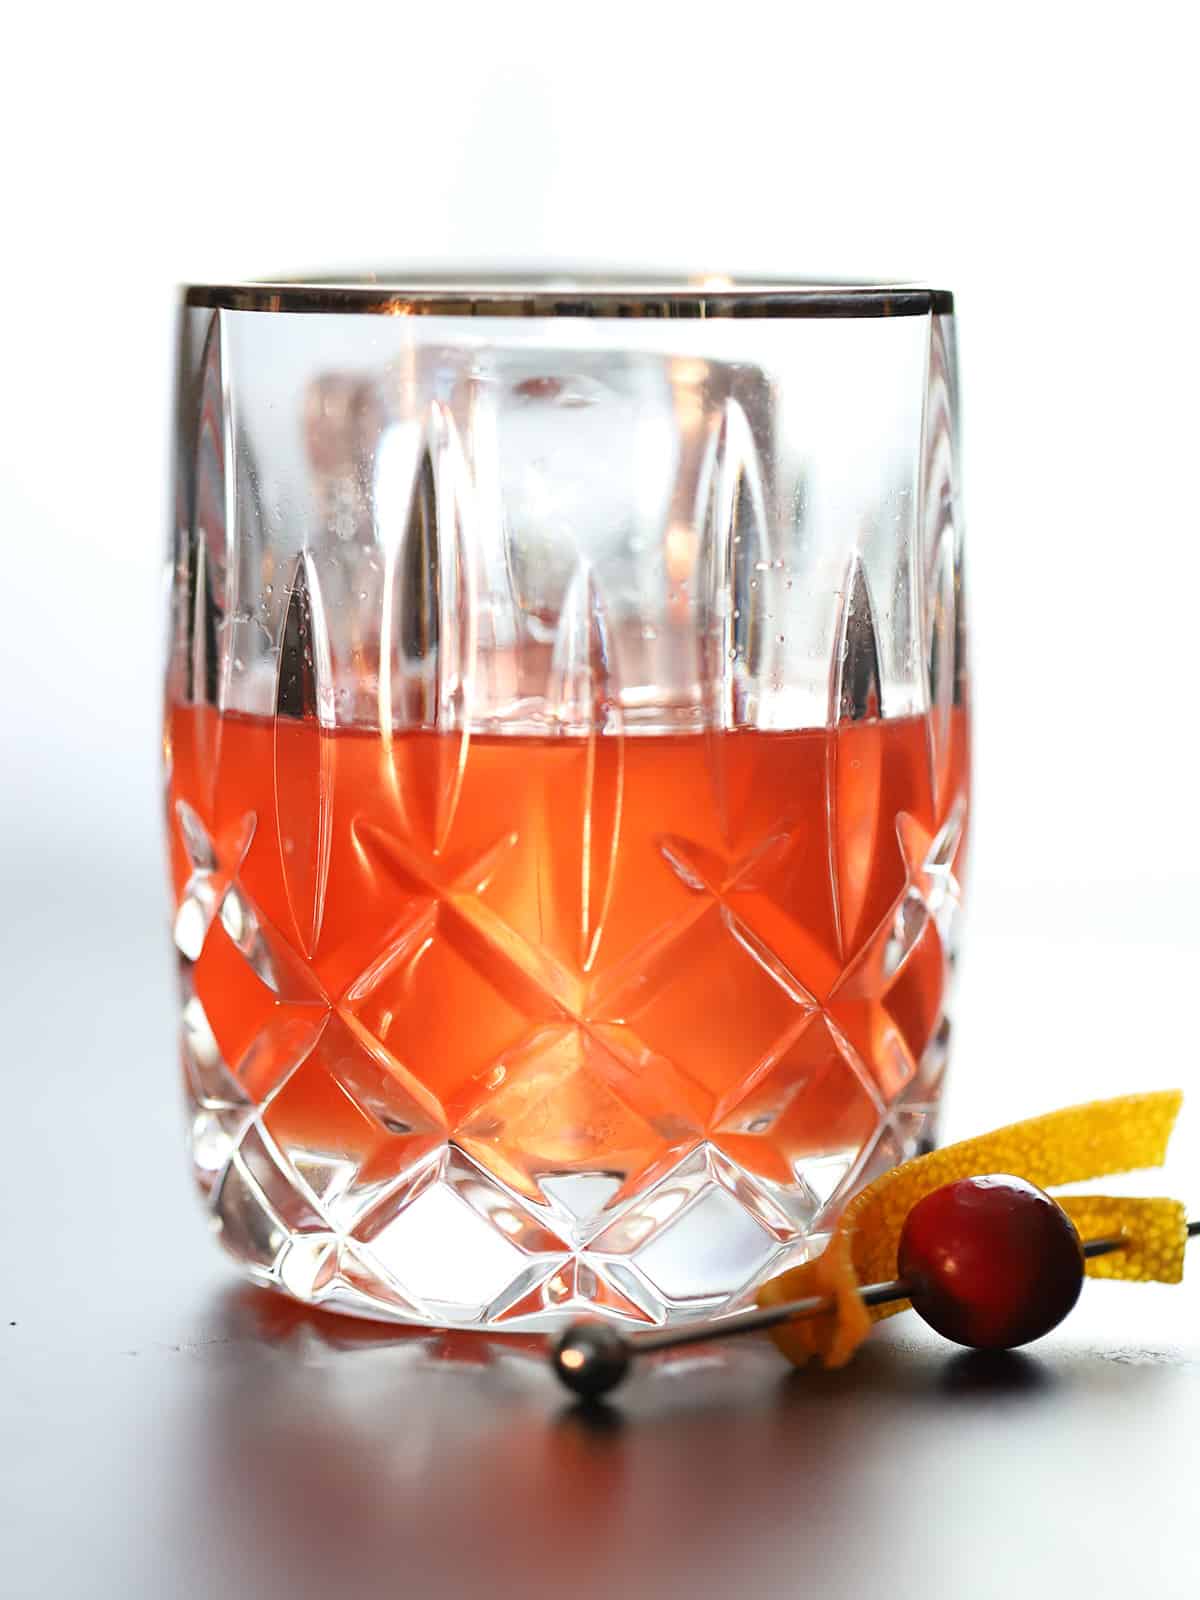 A glass of cranberry old fashioned bourbon cocktail.